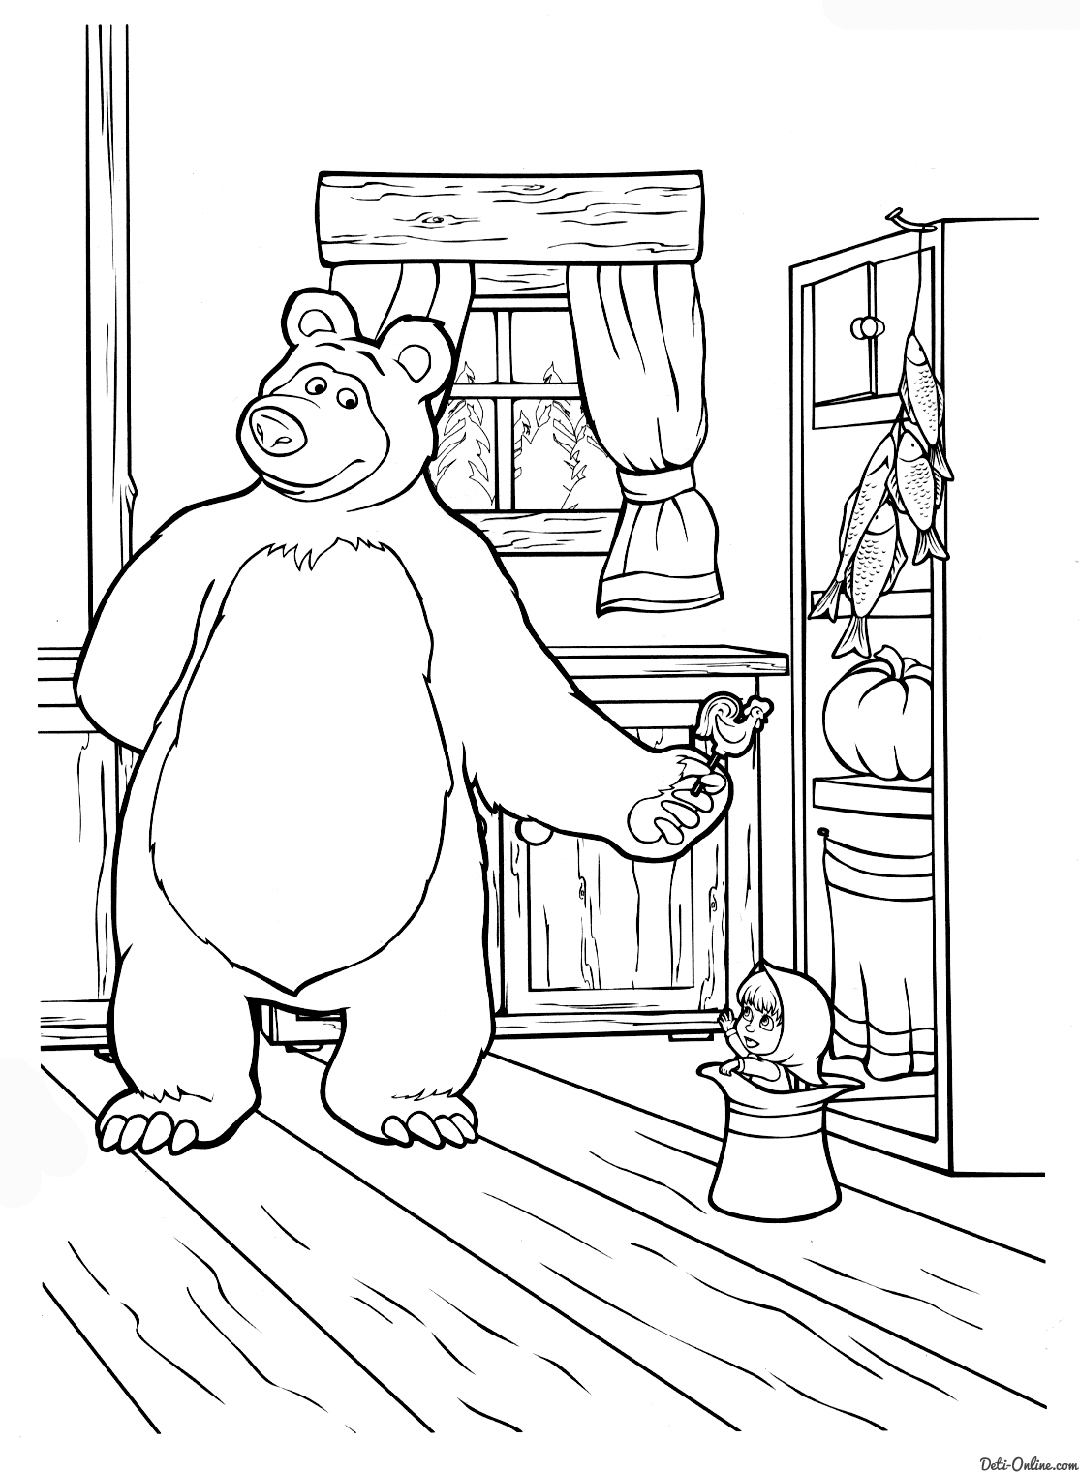 Masha And The Bear Coloring Pages at GetColorings.com | Free printable